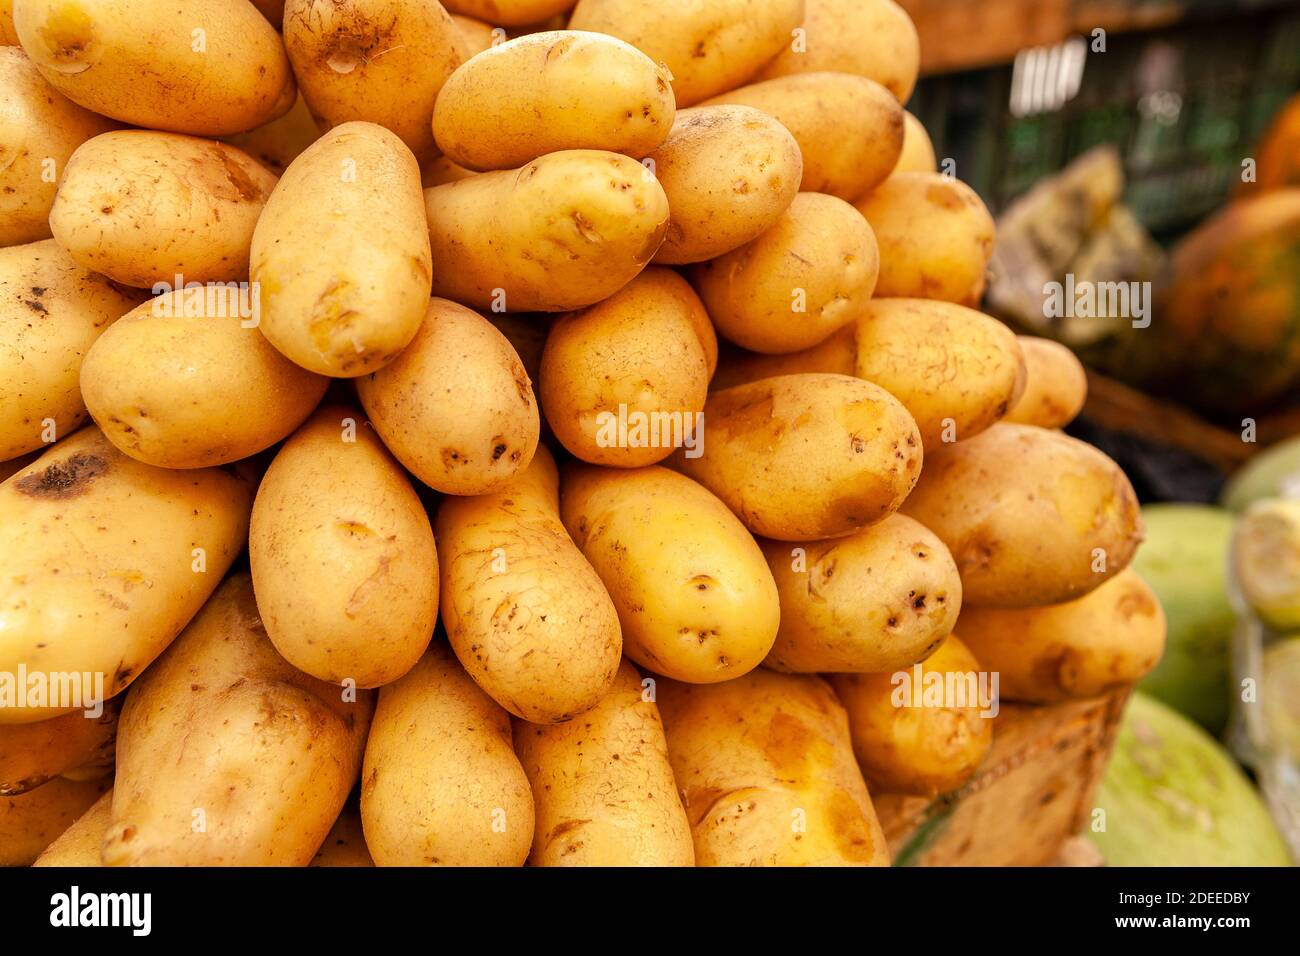 Freshly harvested Potatoes for sale in an open air market in Guatemala. Stock Photo